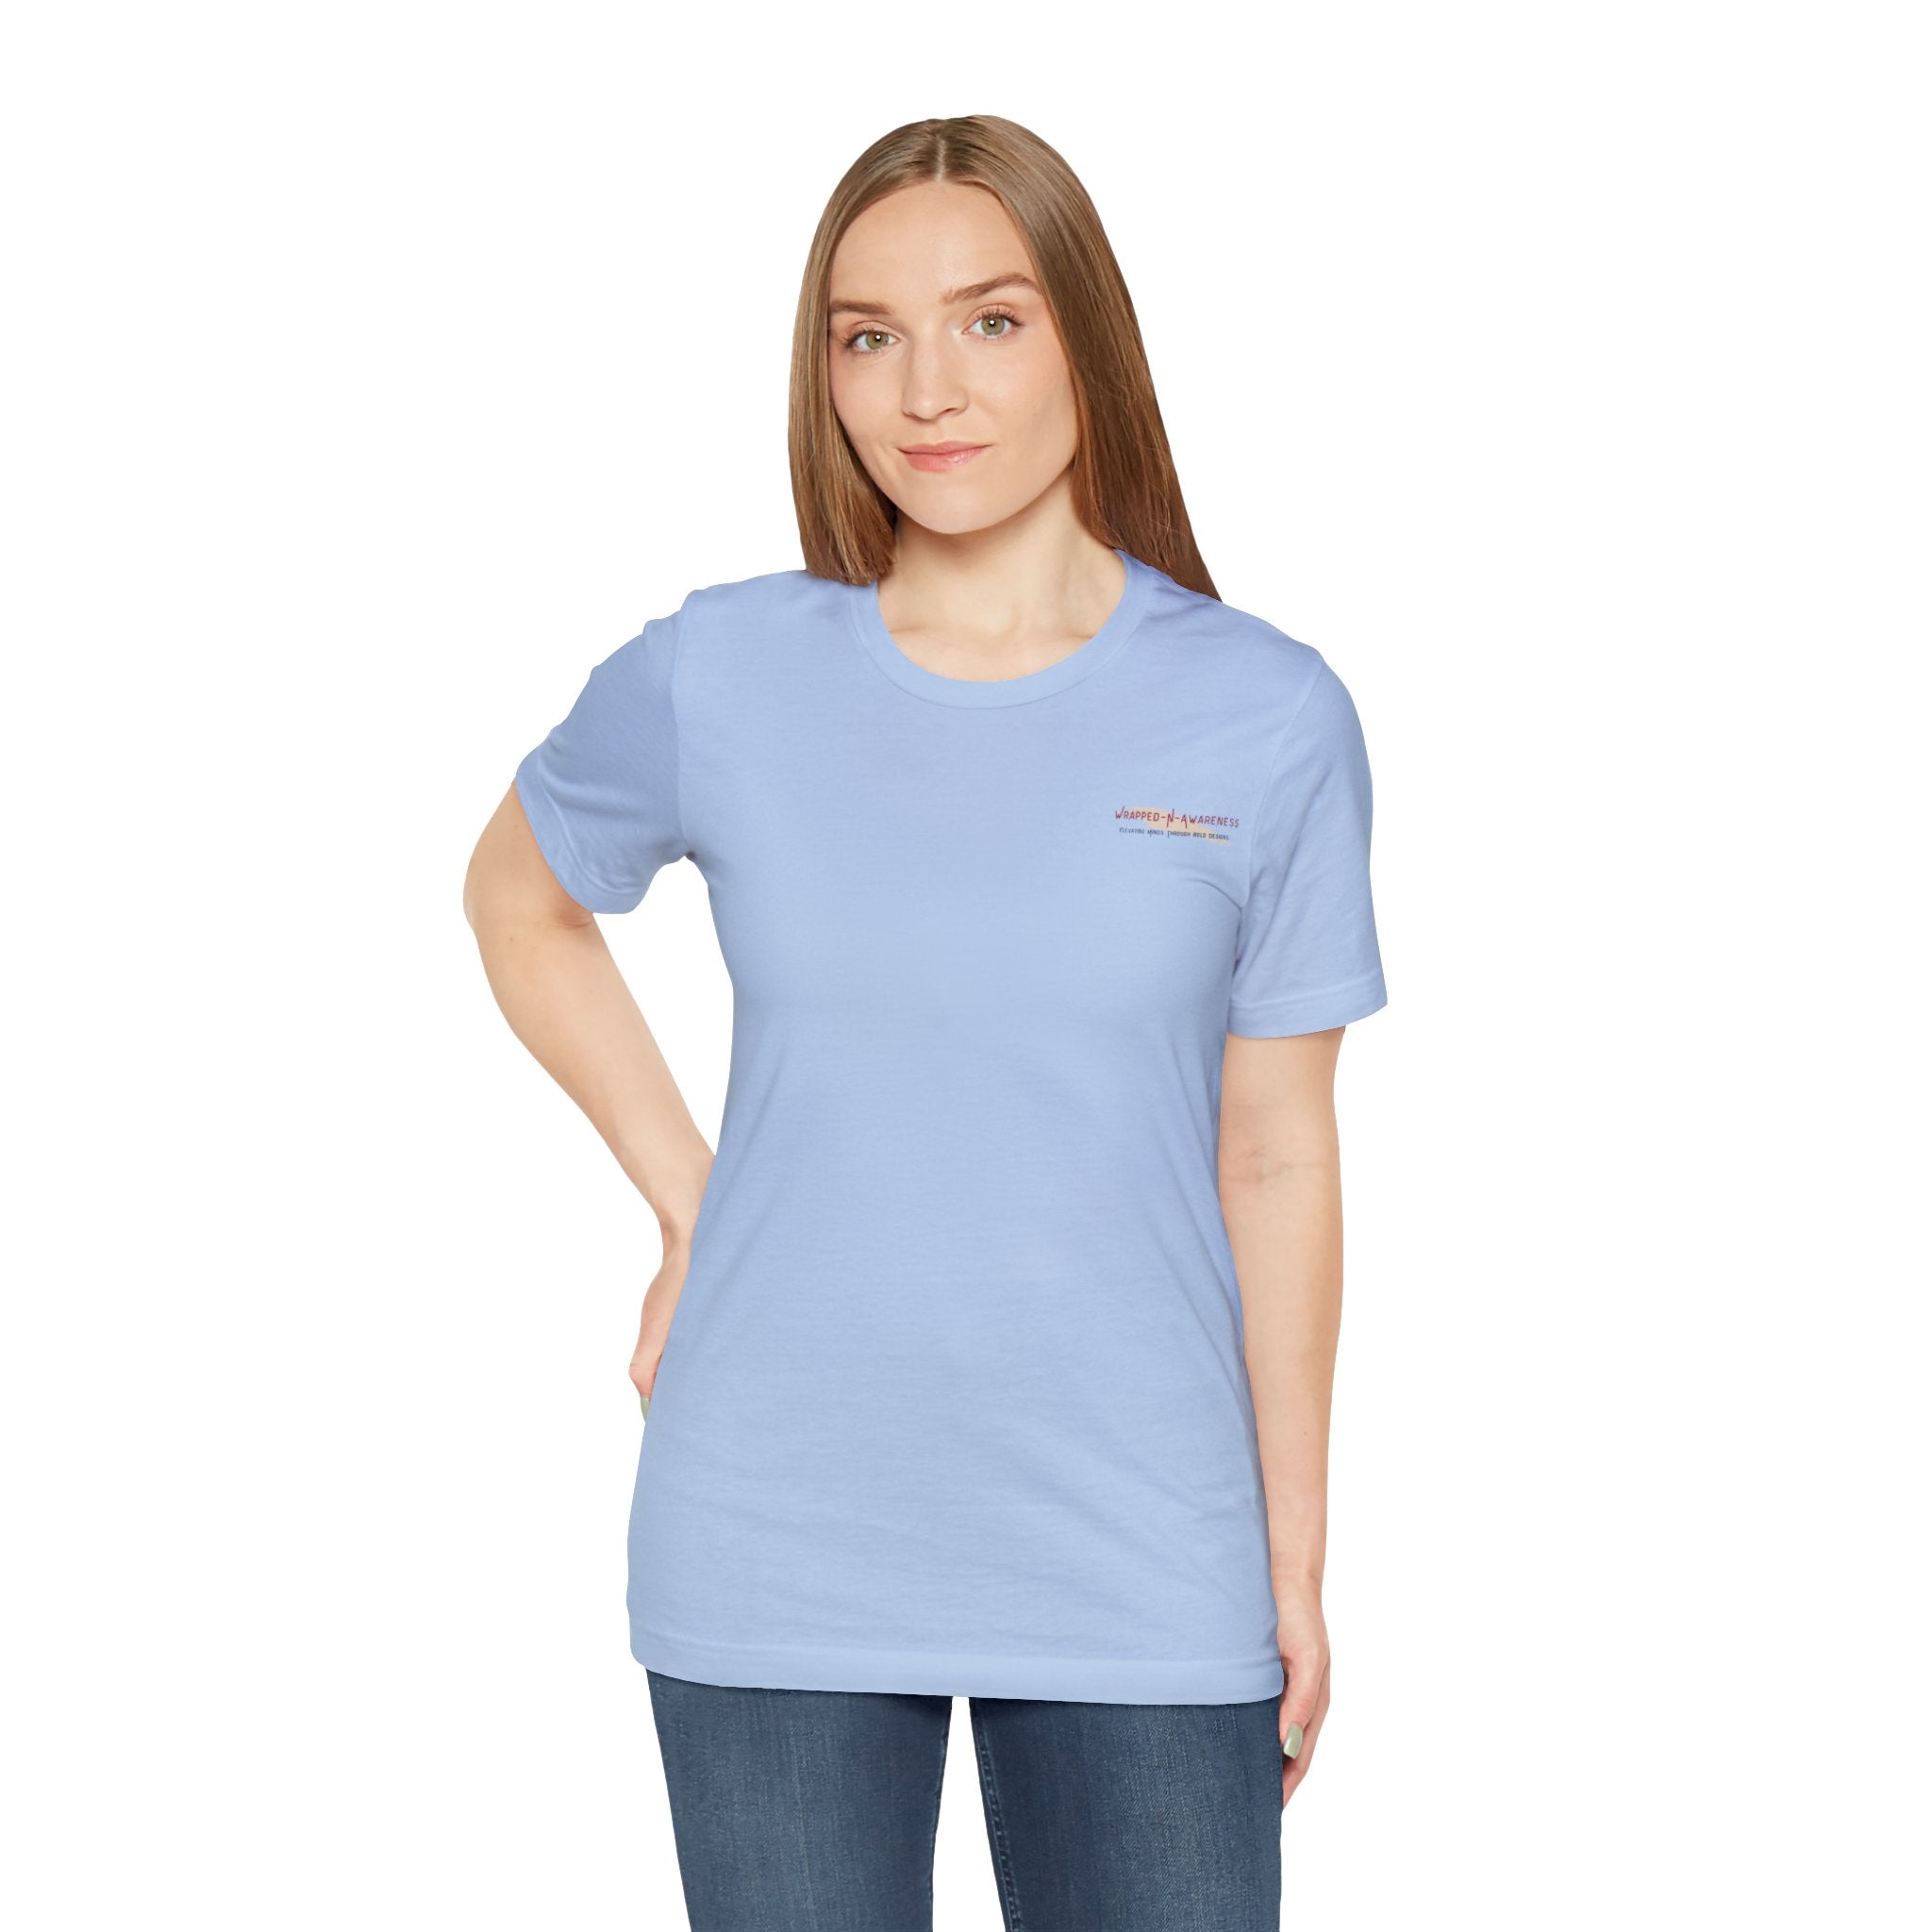 Inspire Growth Jersey Tee - Bella+Canvas 3001 Turquoise Airlume Cotton Bella+Canvas 3001 Crew Neckline Jersey Short Sleeve Lightweight Fabric Mental Health Support Retail Fit Tear-away Label Tee Unisex Tee T-Shirt 10857806899941372732_2048 Printify